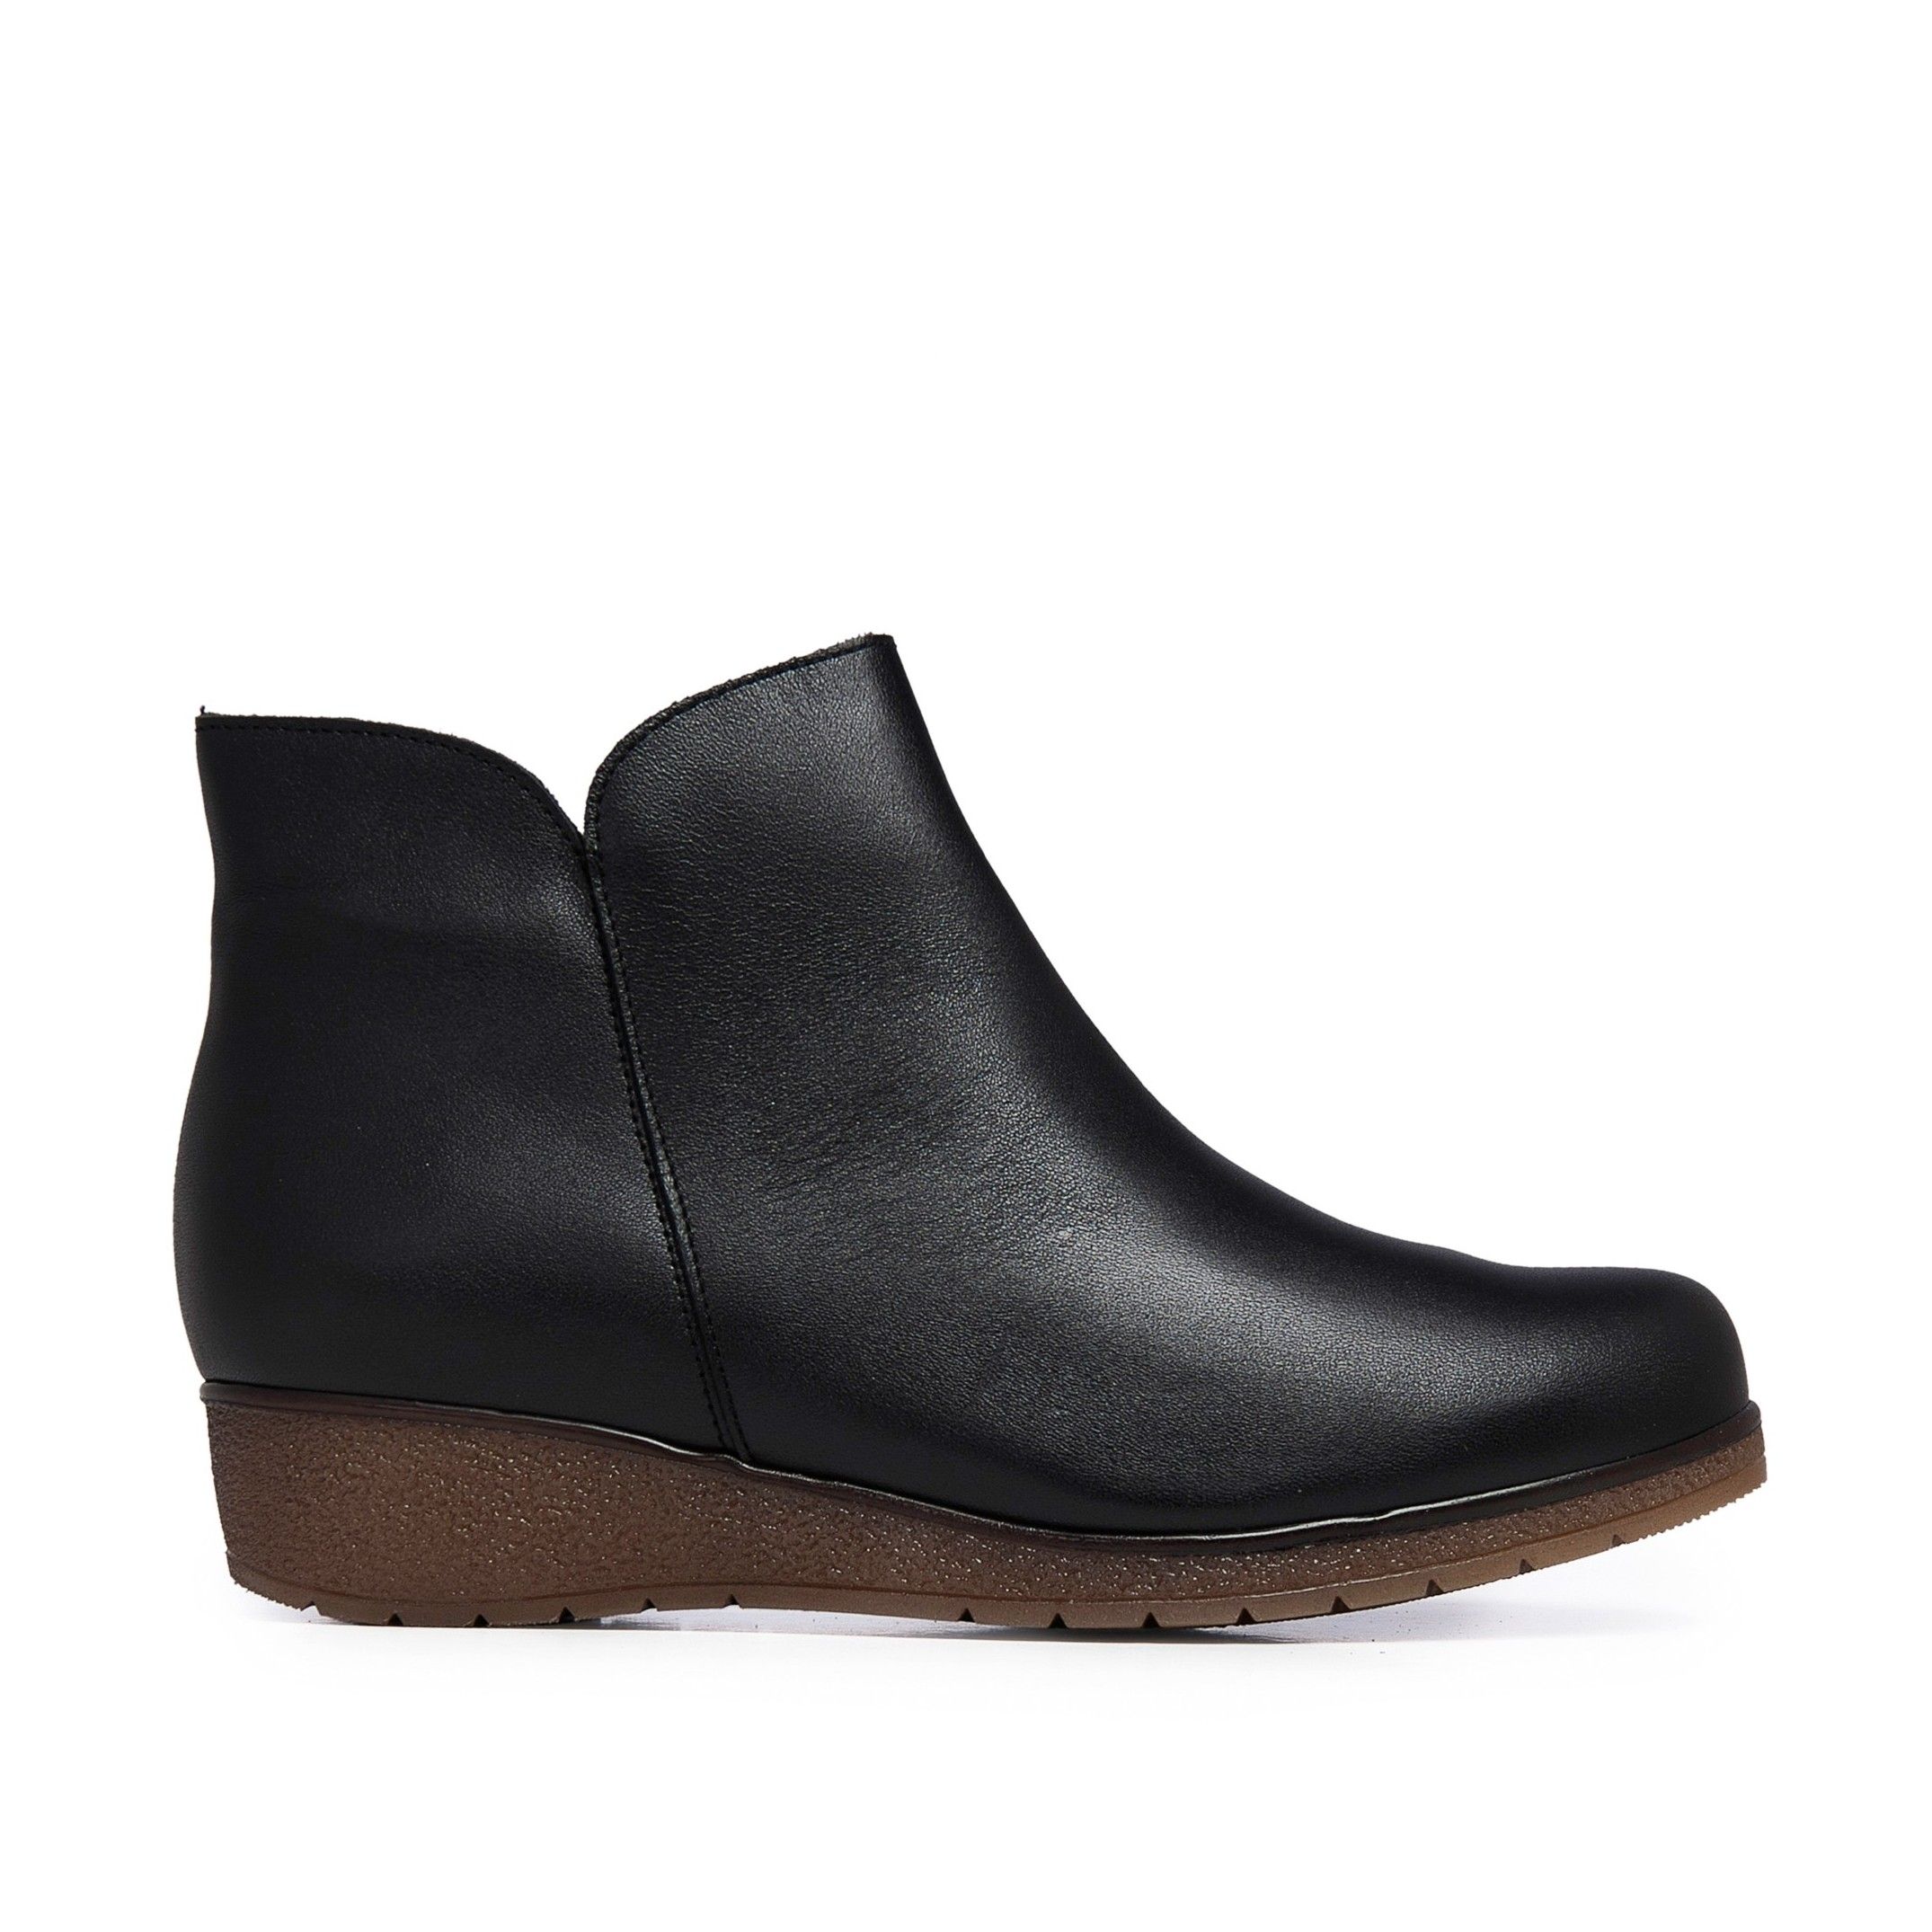 Leather ankle boots for women. Wedge and Zipper closure from inner. Insole made of leather. Upper made of leather. Inner made of textile. Pltaform: 1 cm. Heel: 3 cm. Made in Spain.